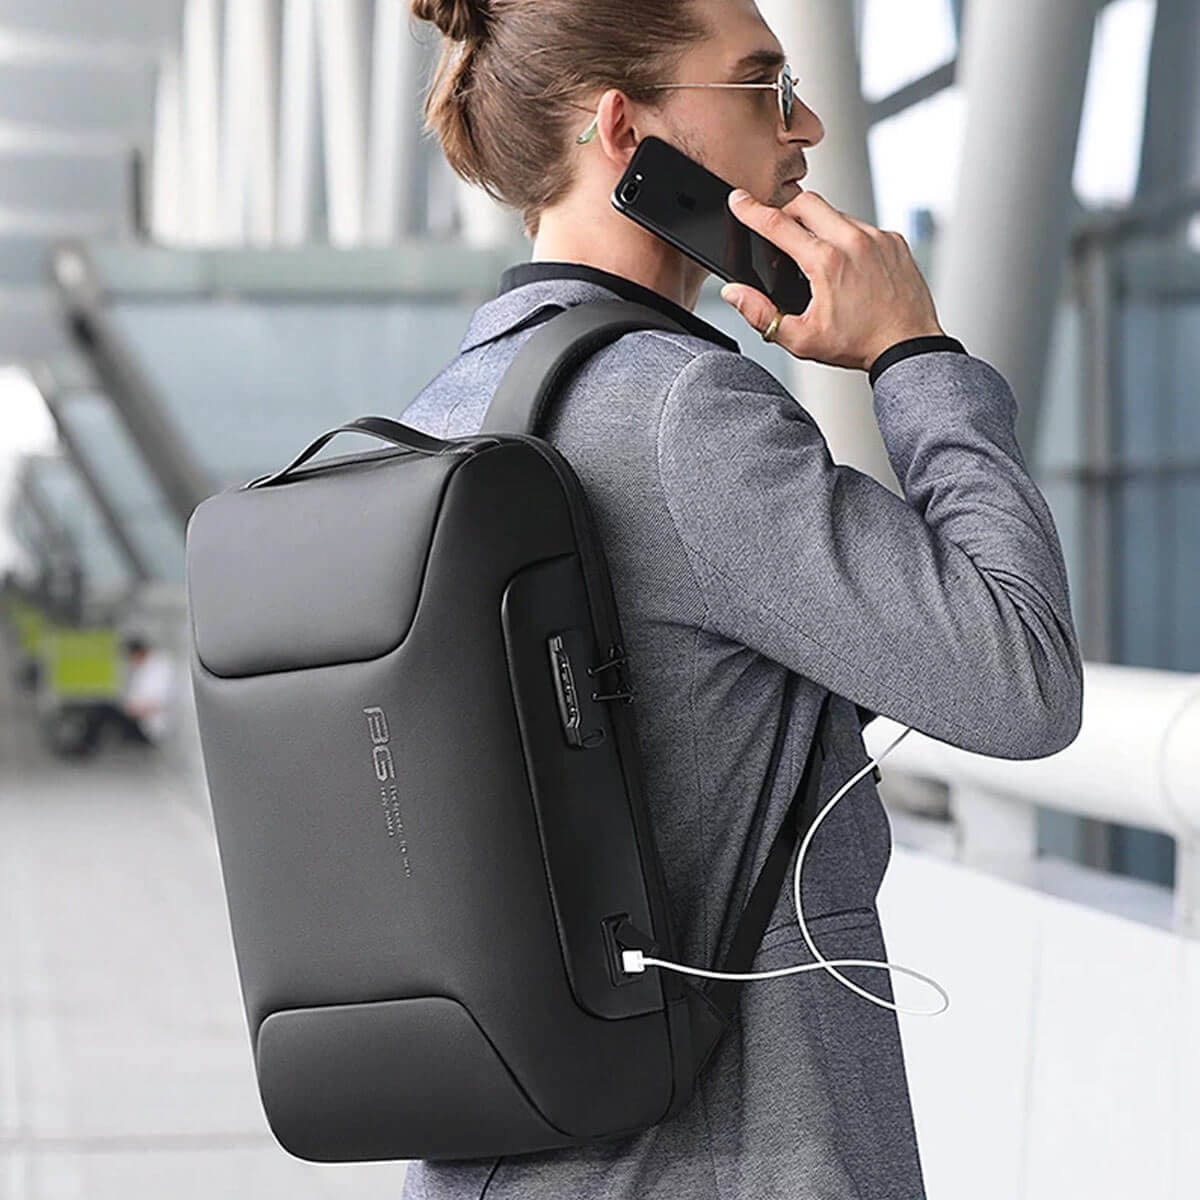 Secure laptop backpack for professionals